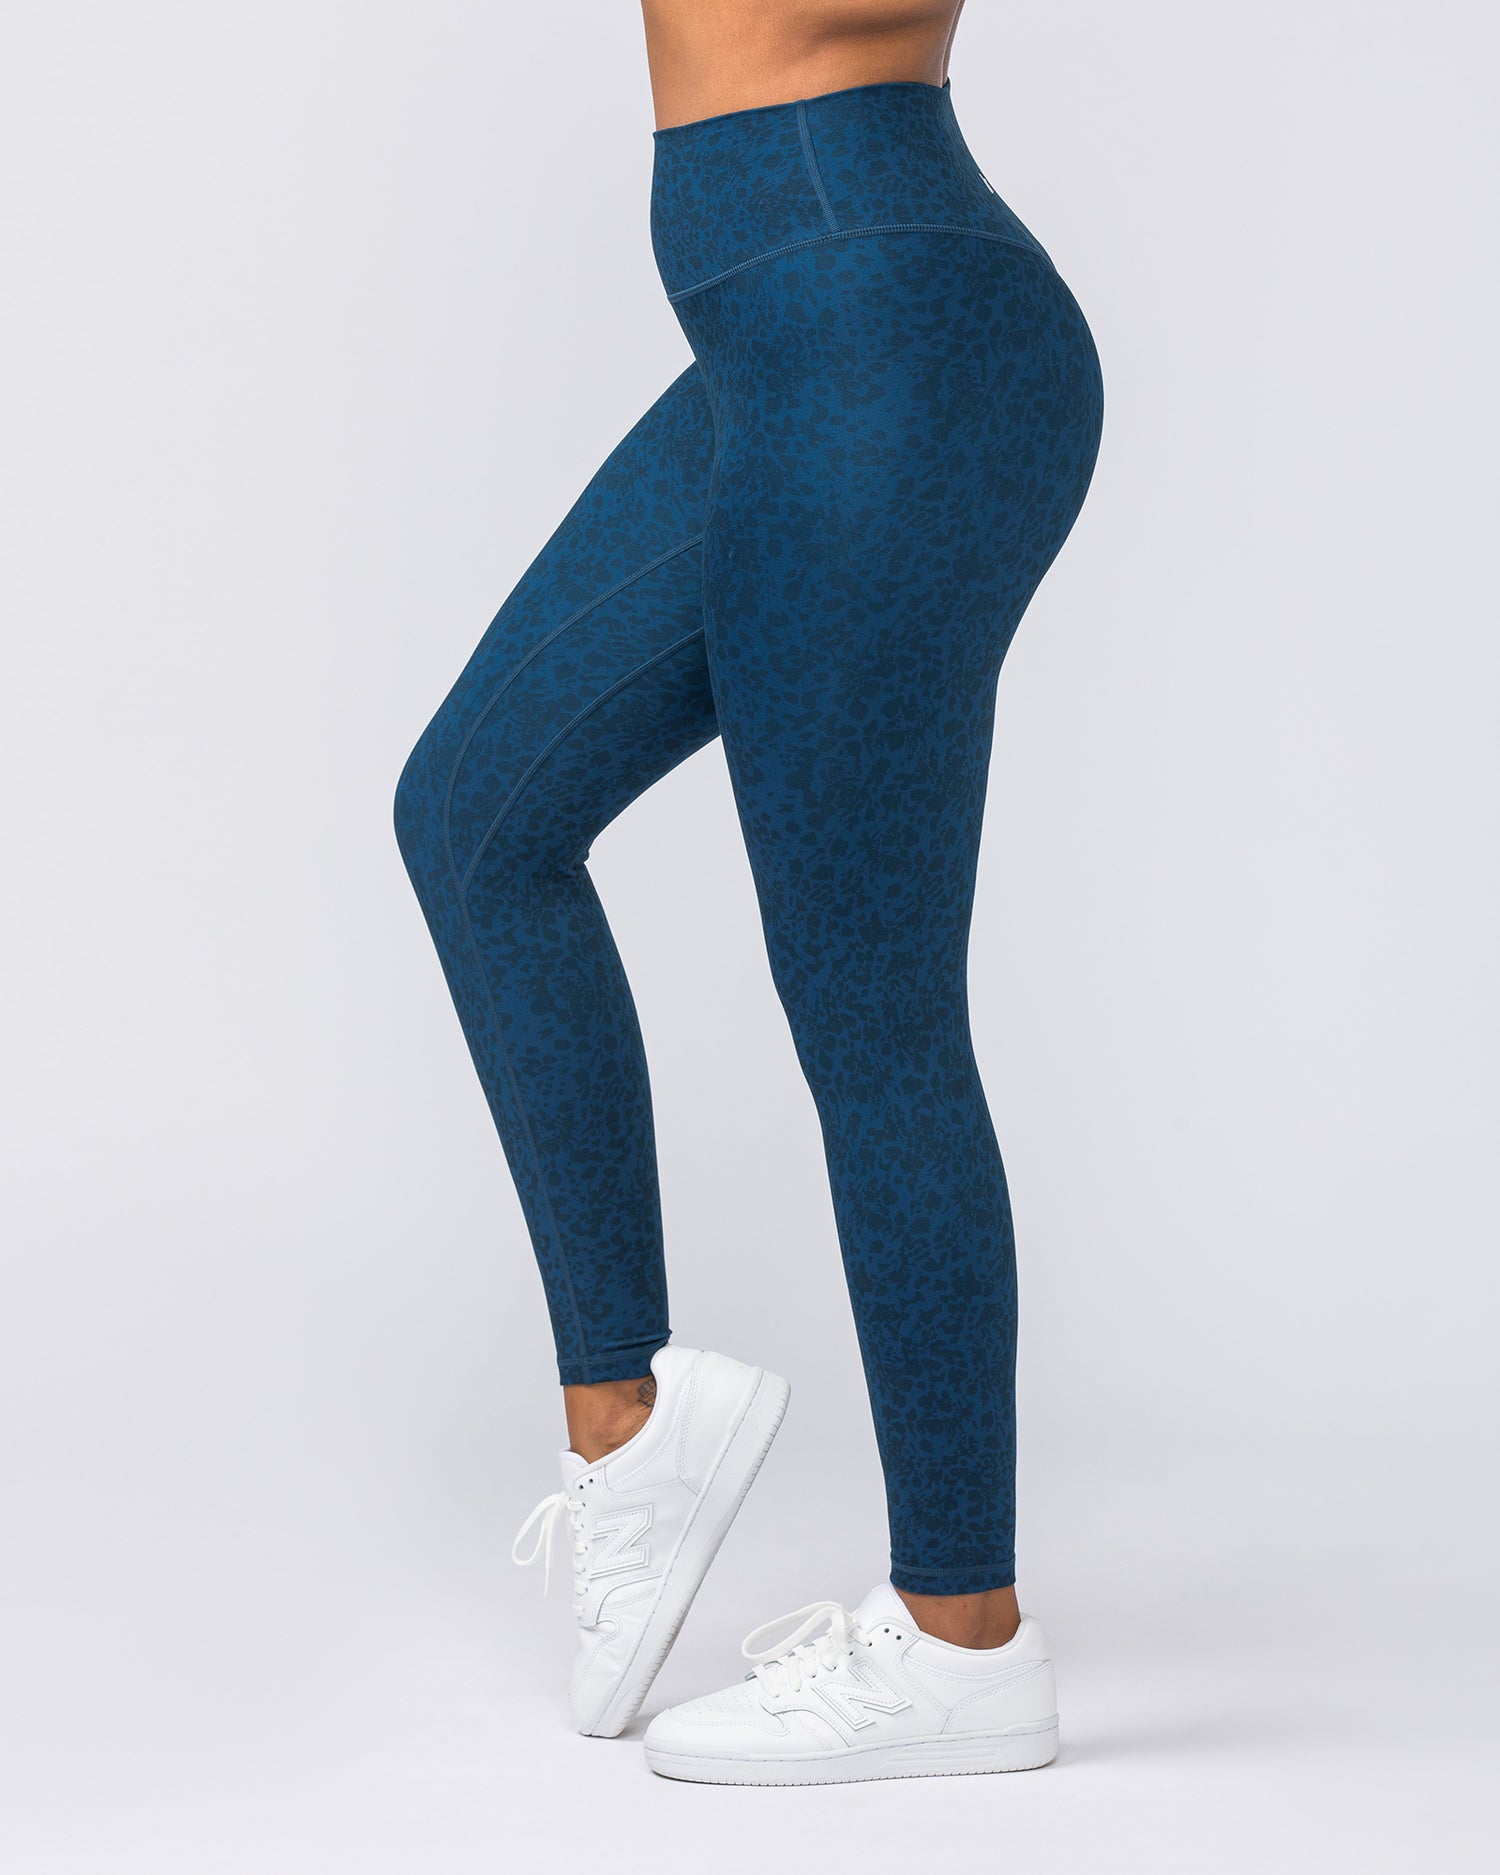 Zero Rise Everyday Ankle Length Leggings - Pacific Abstract Print